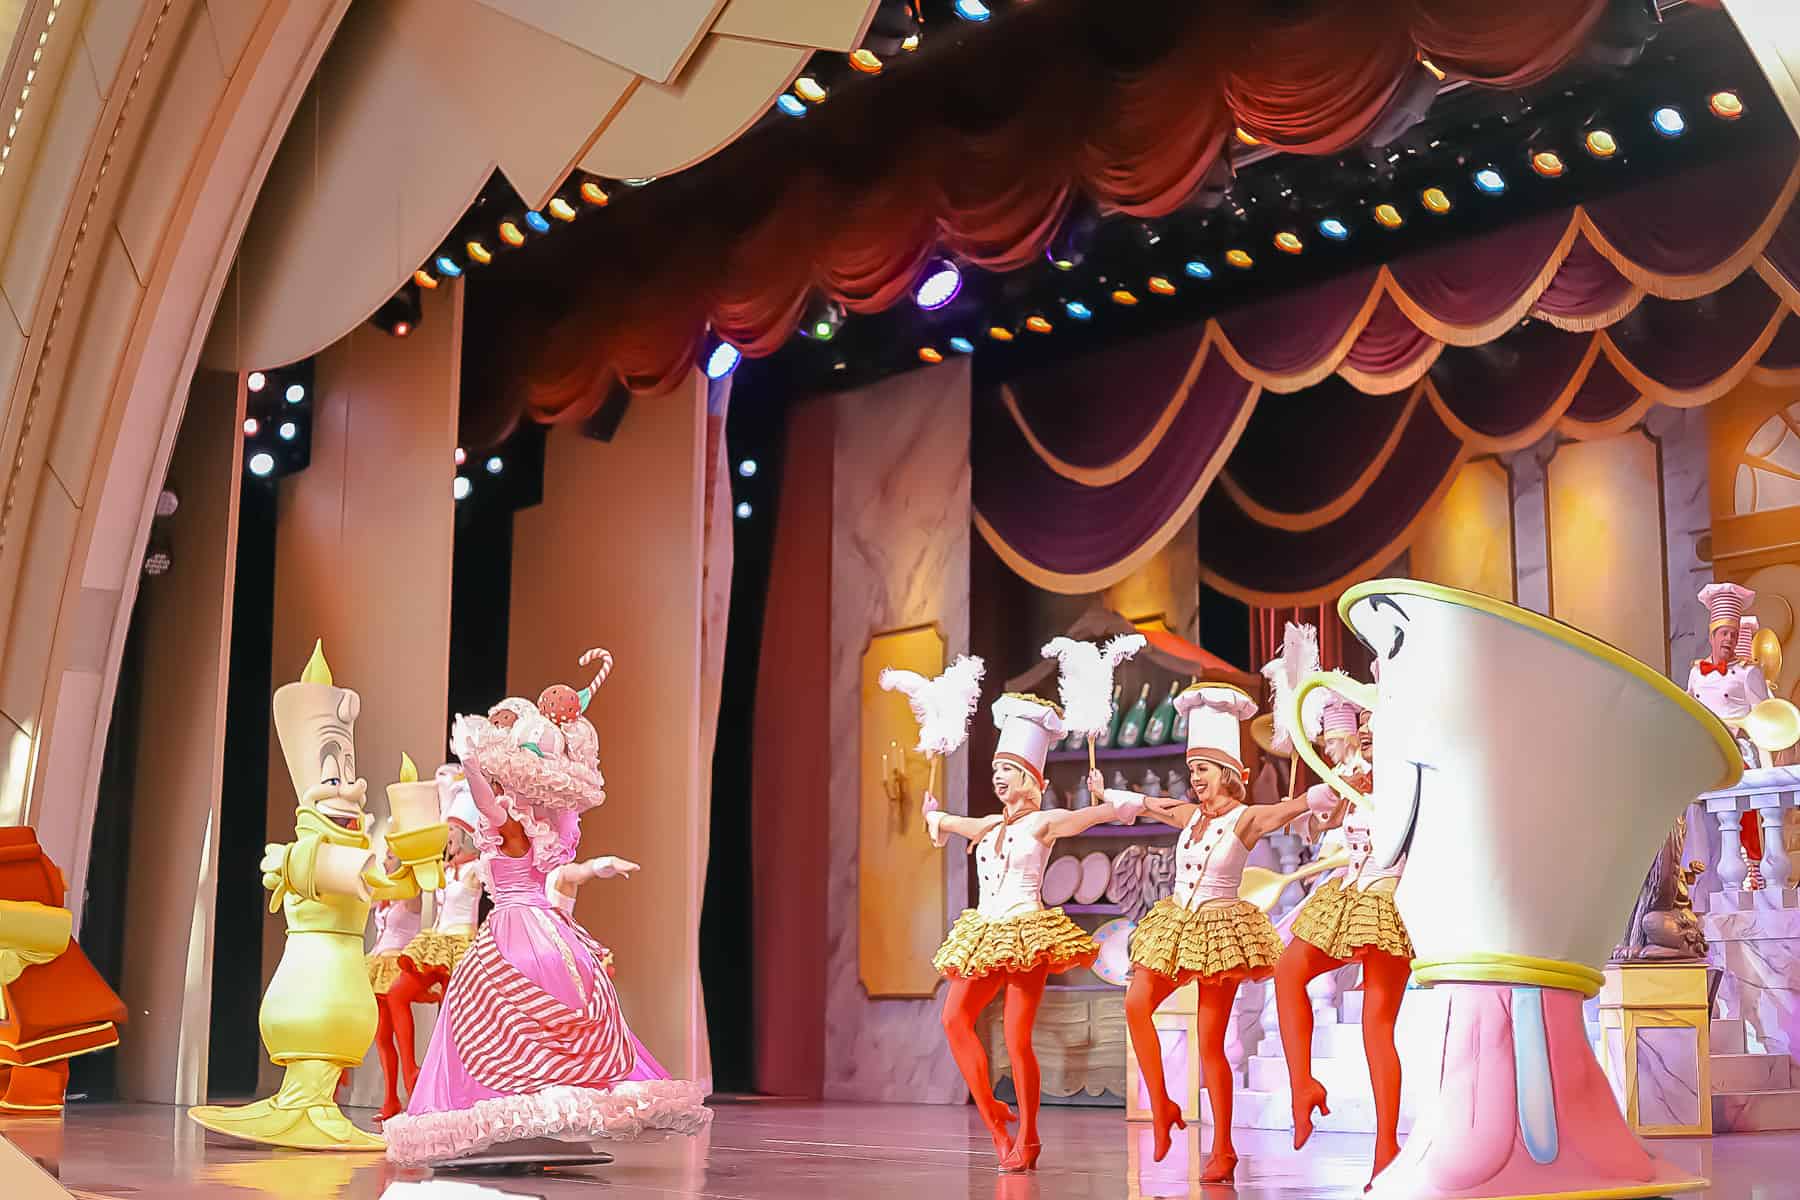 Chip and several other dancers performing on stage. 